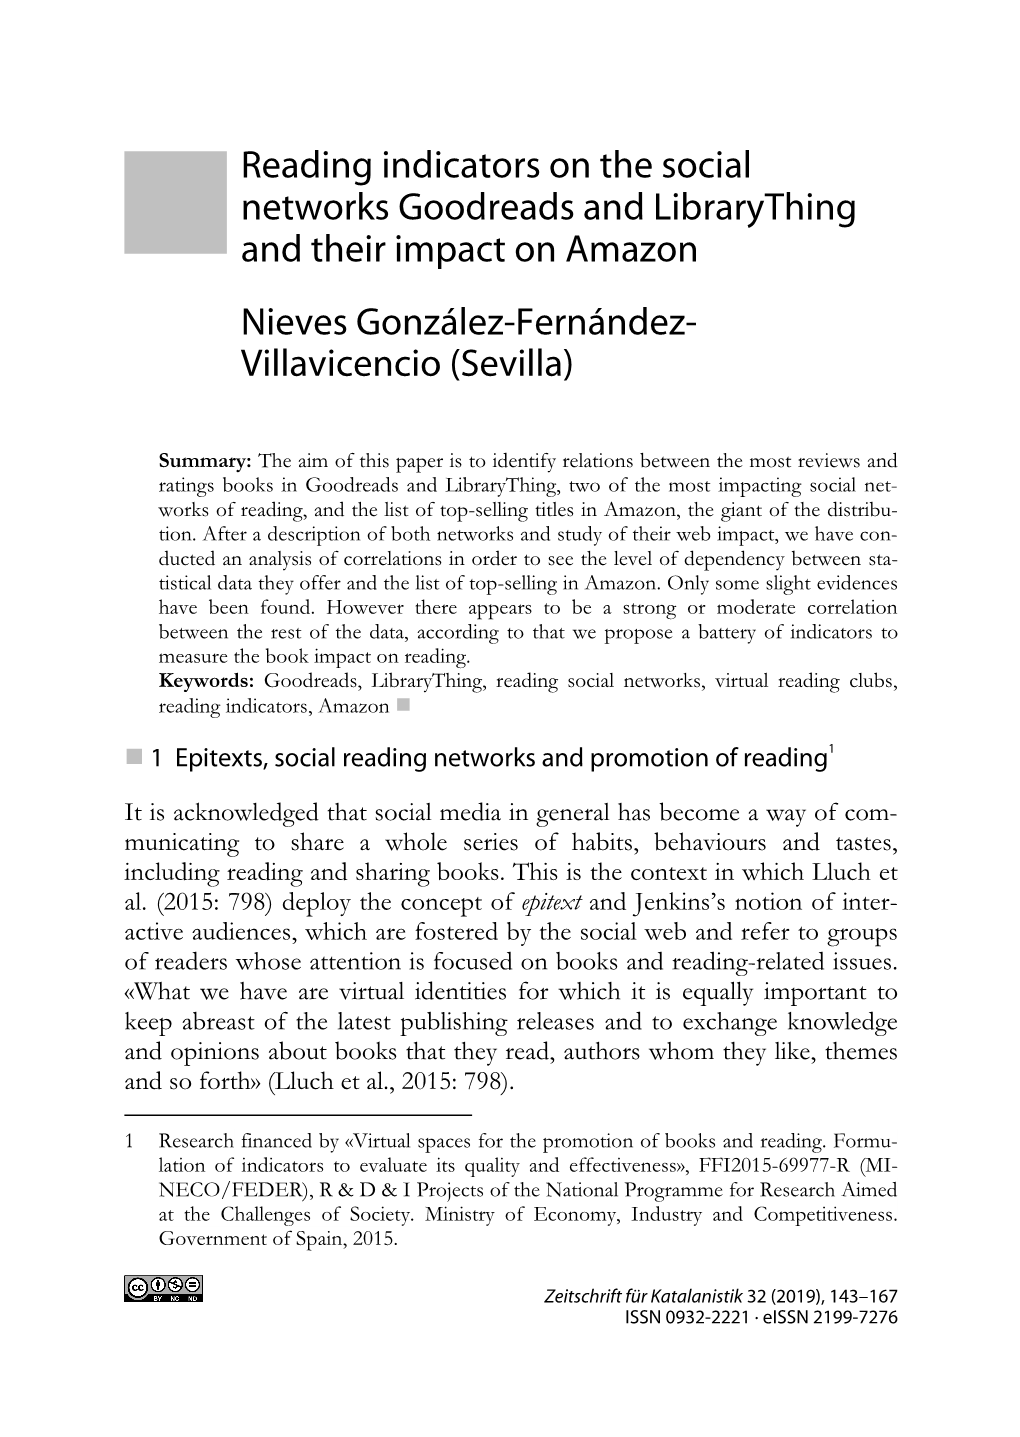 Reading Indicators on the Social Networks Goodreads and Librarything and Their Impact on Amazon Nieves González-Fernández- Villavicencio (Sevilla)